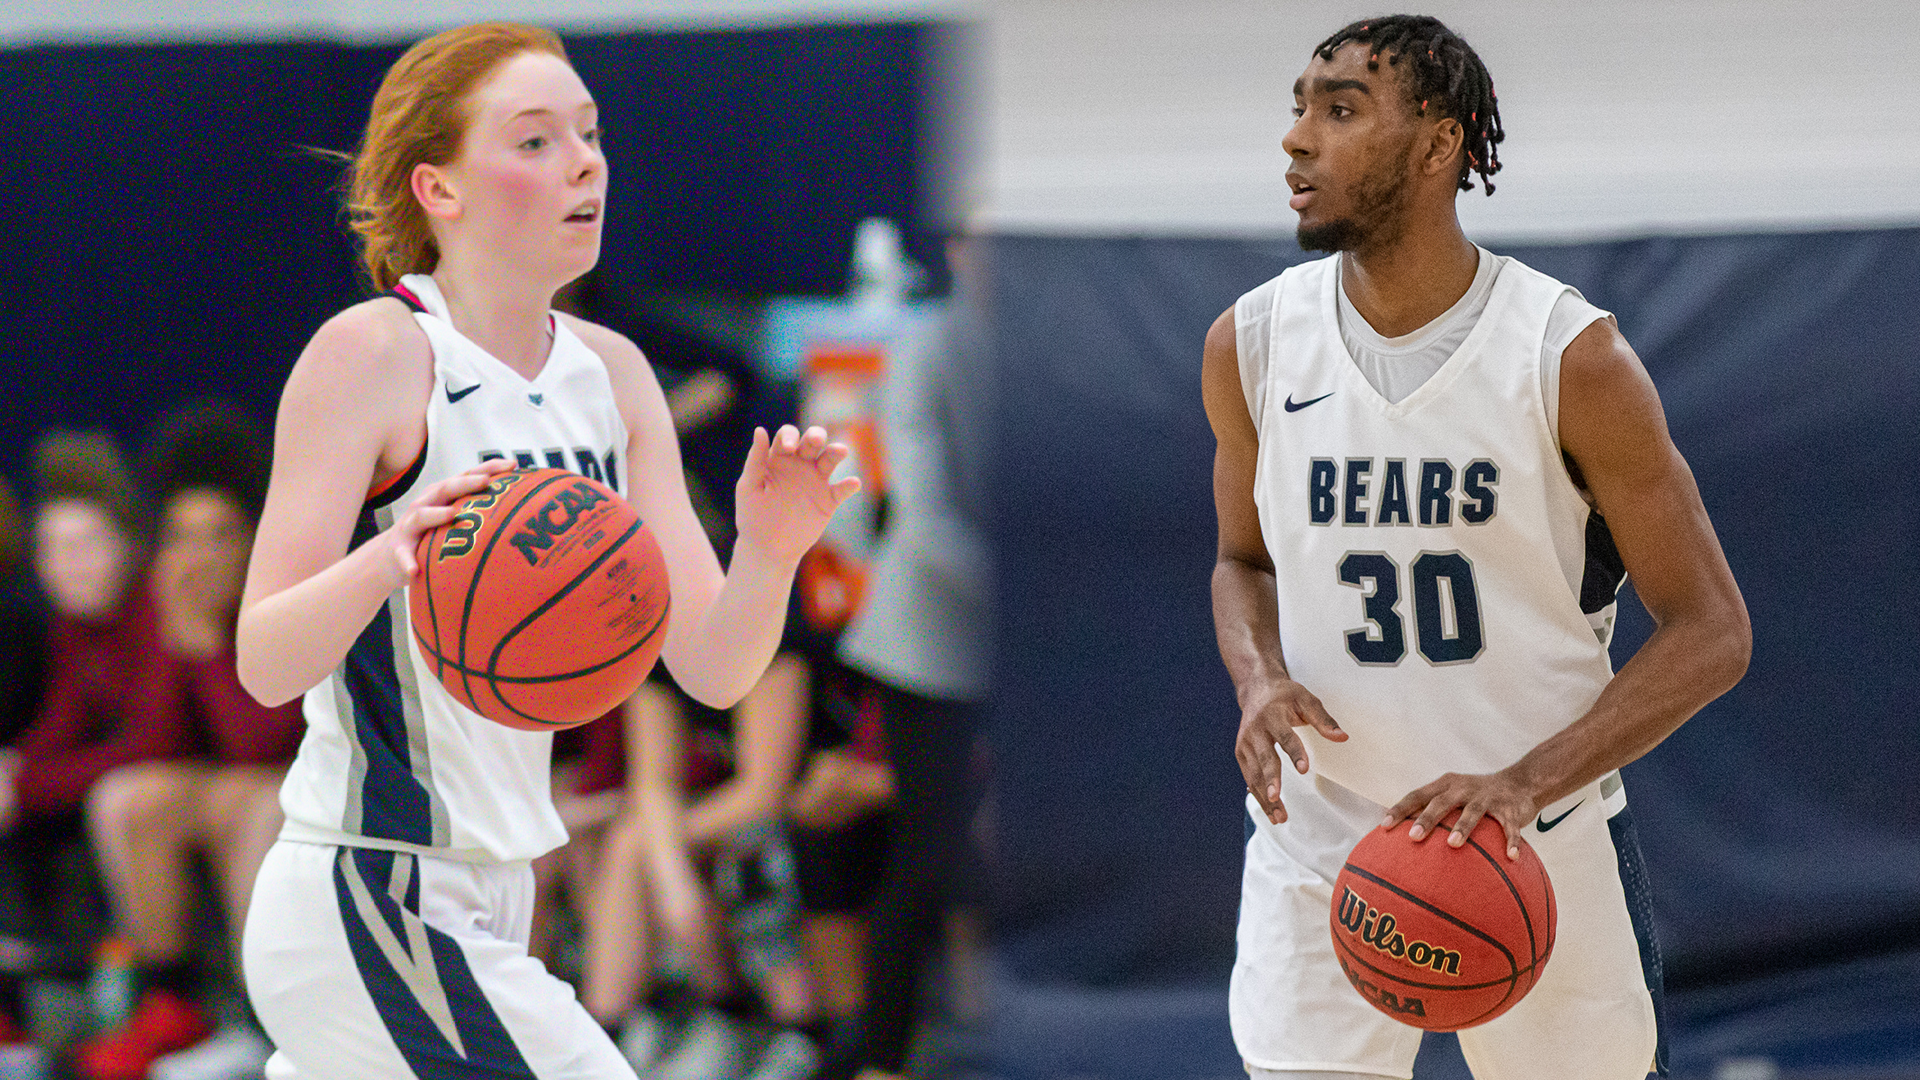 O'Donnell & Etheart Named Student-Athletes of the Year as 2019-20 Awards Announced